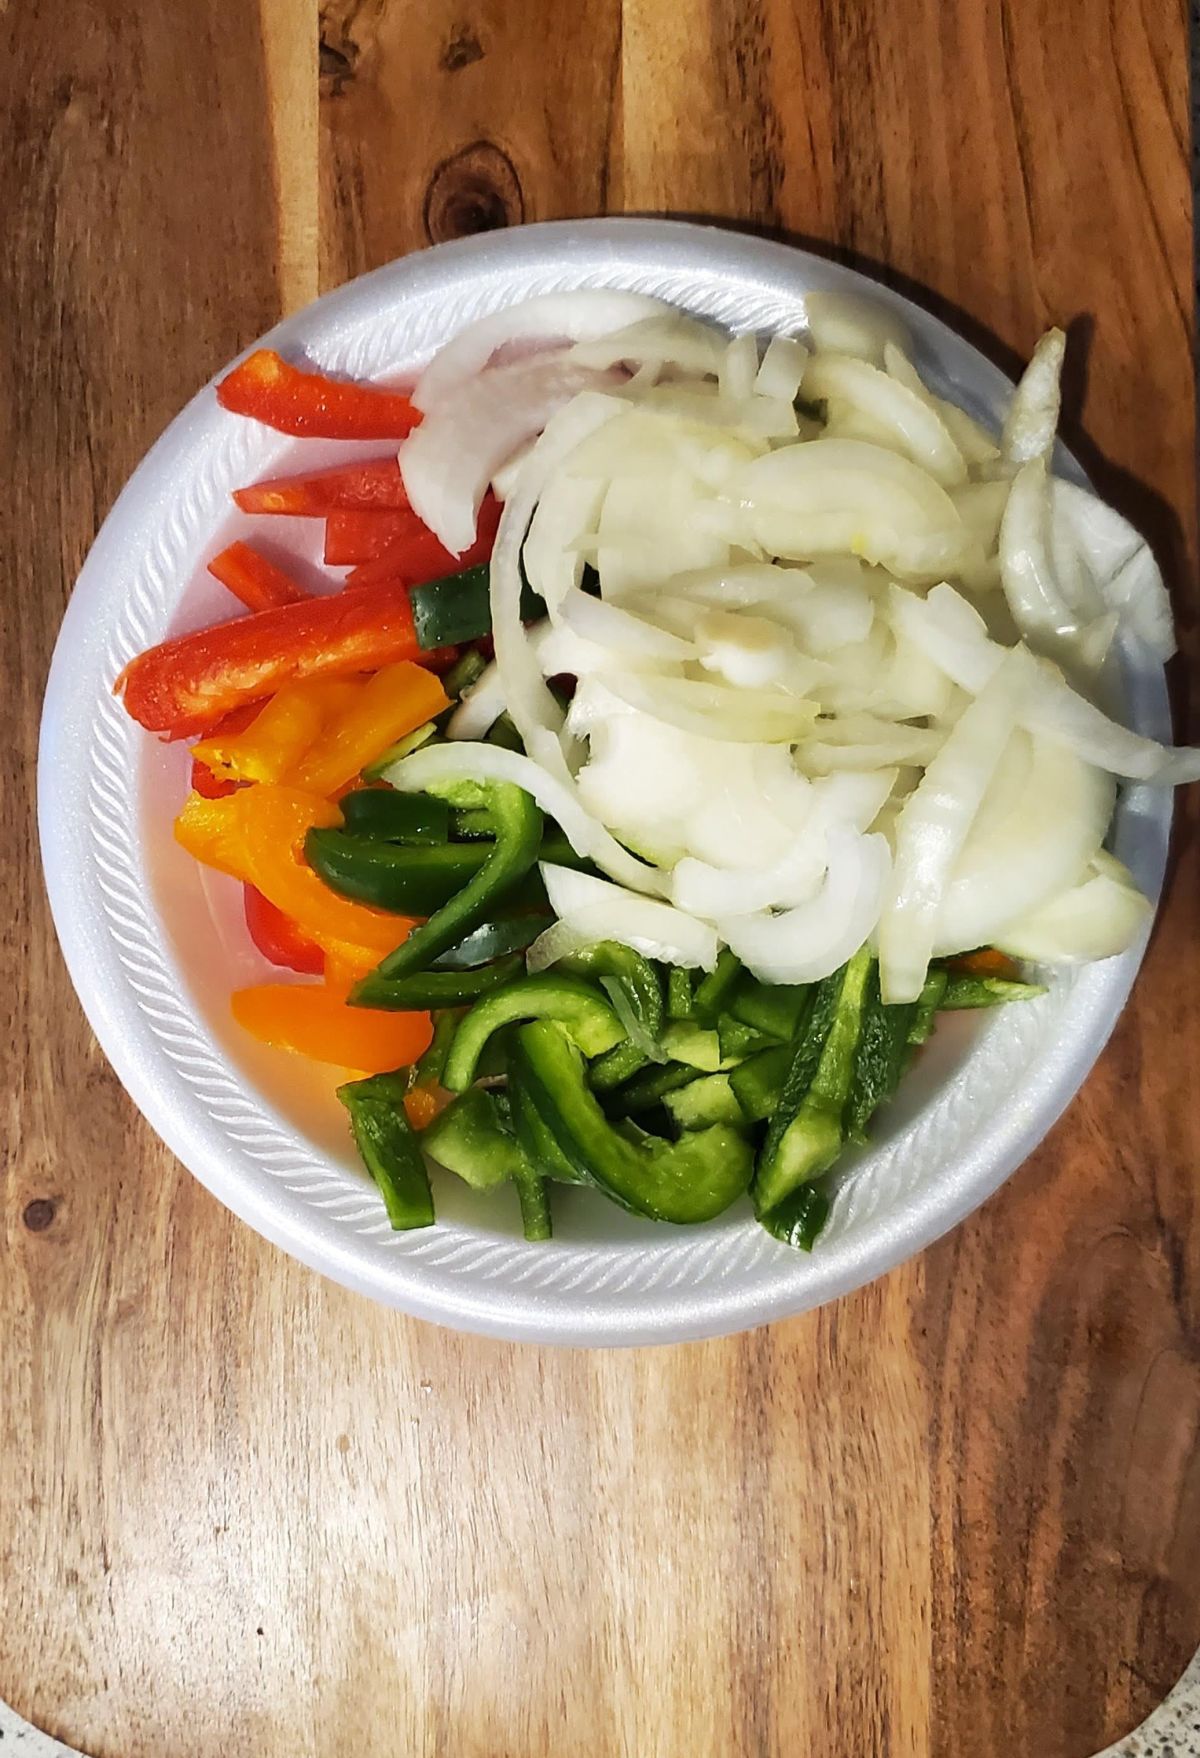 onions and peppers.